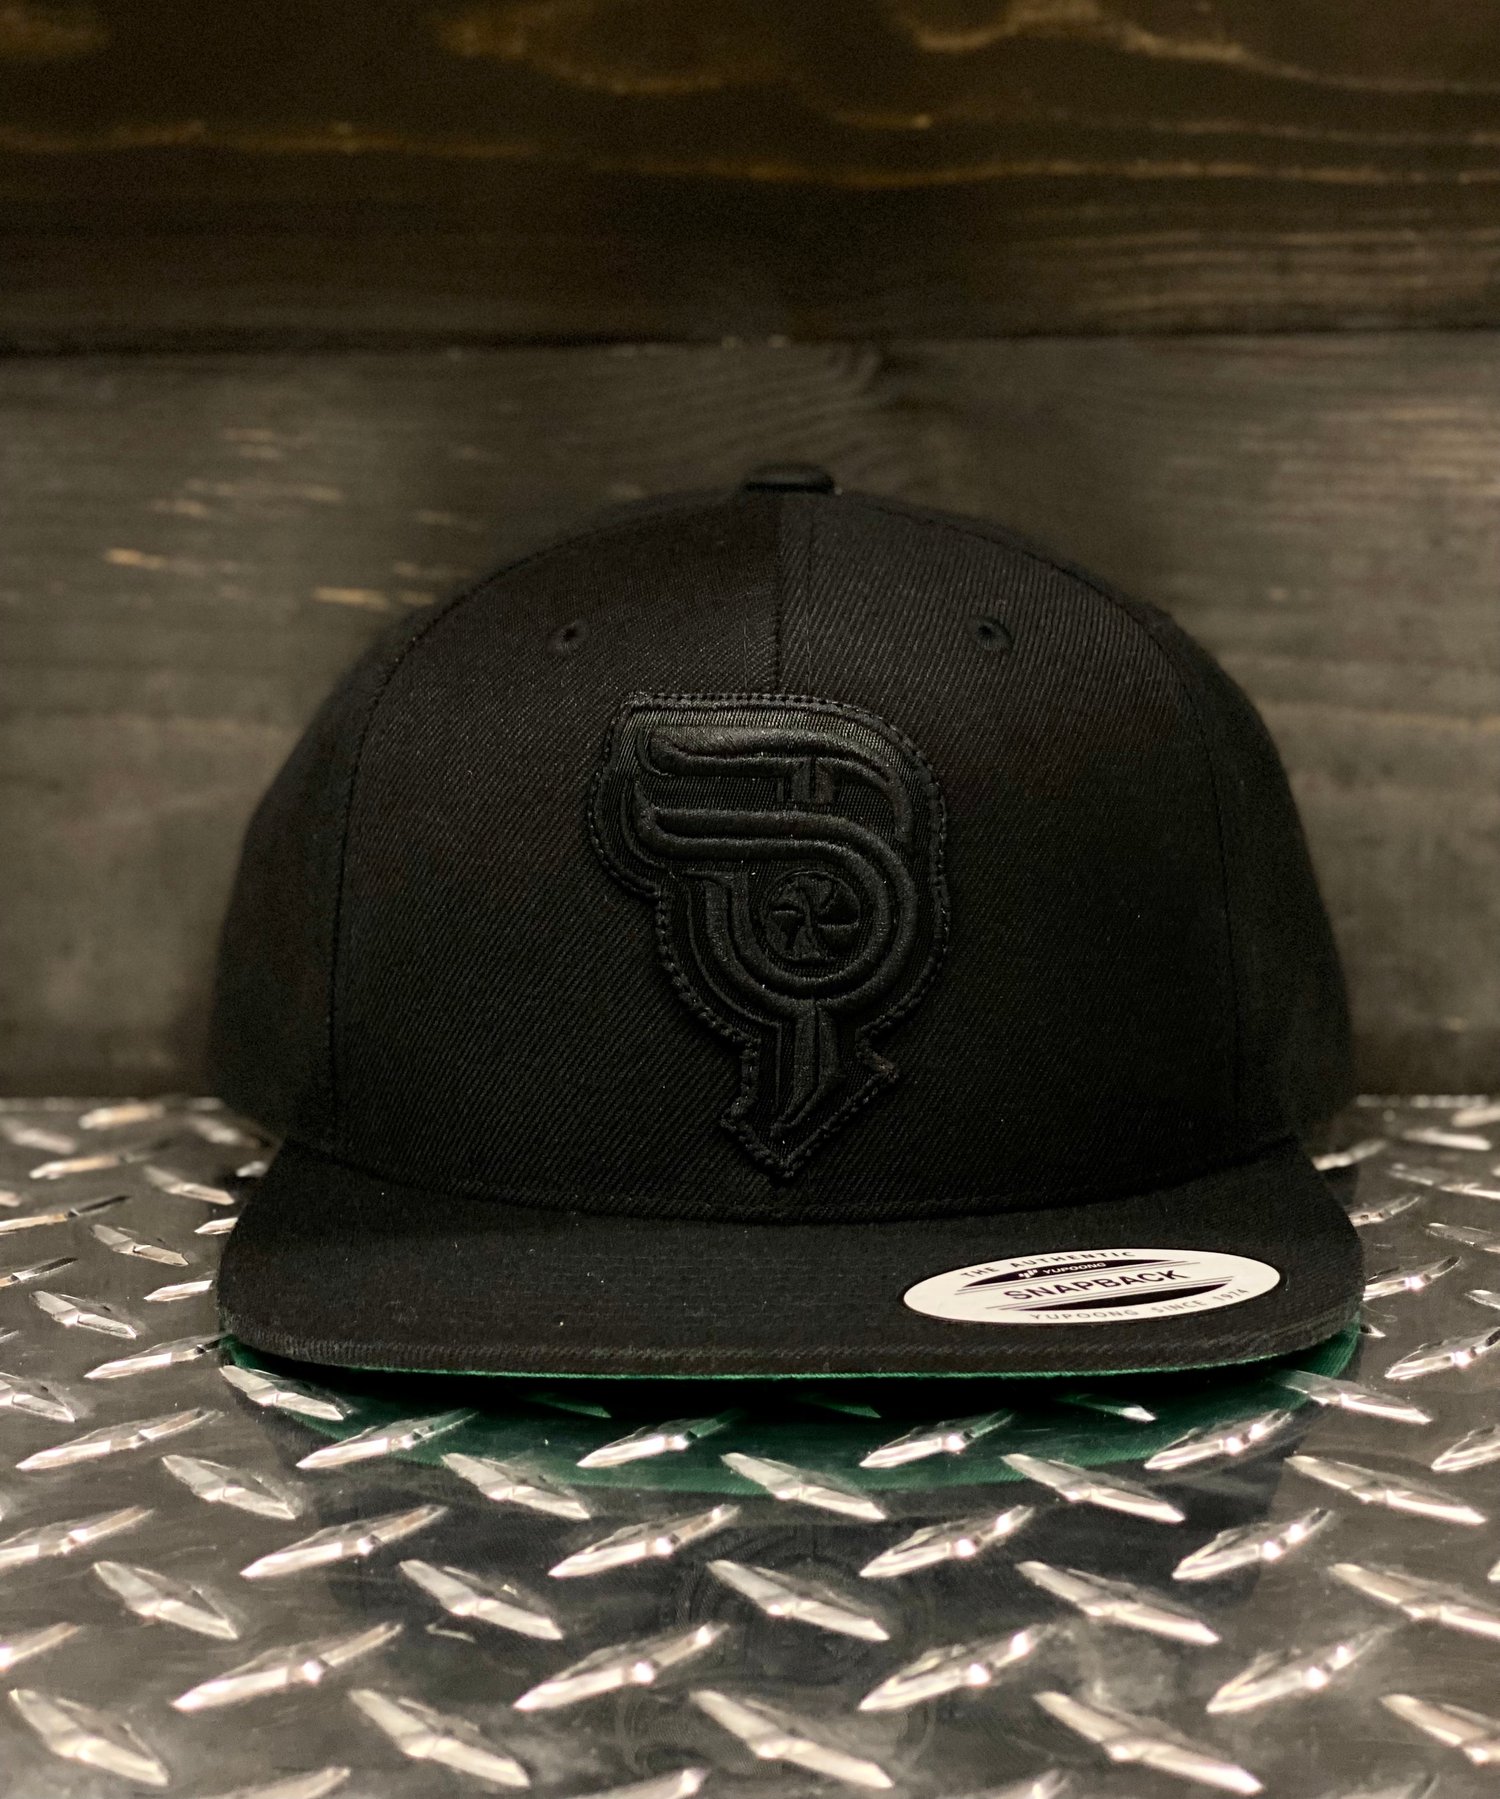 New Blacked Out Project Torque Logo Cap | Project Torque